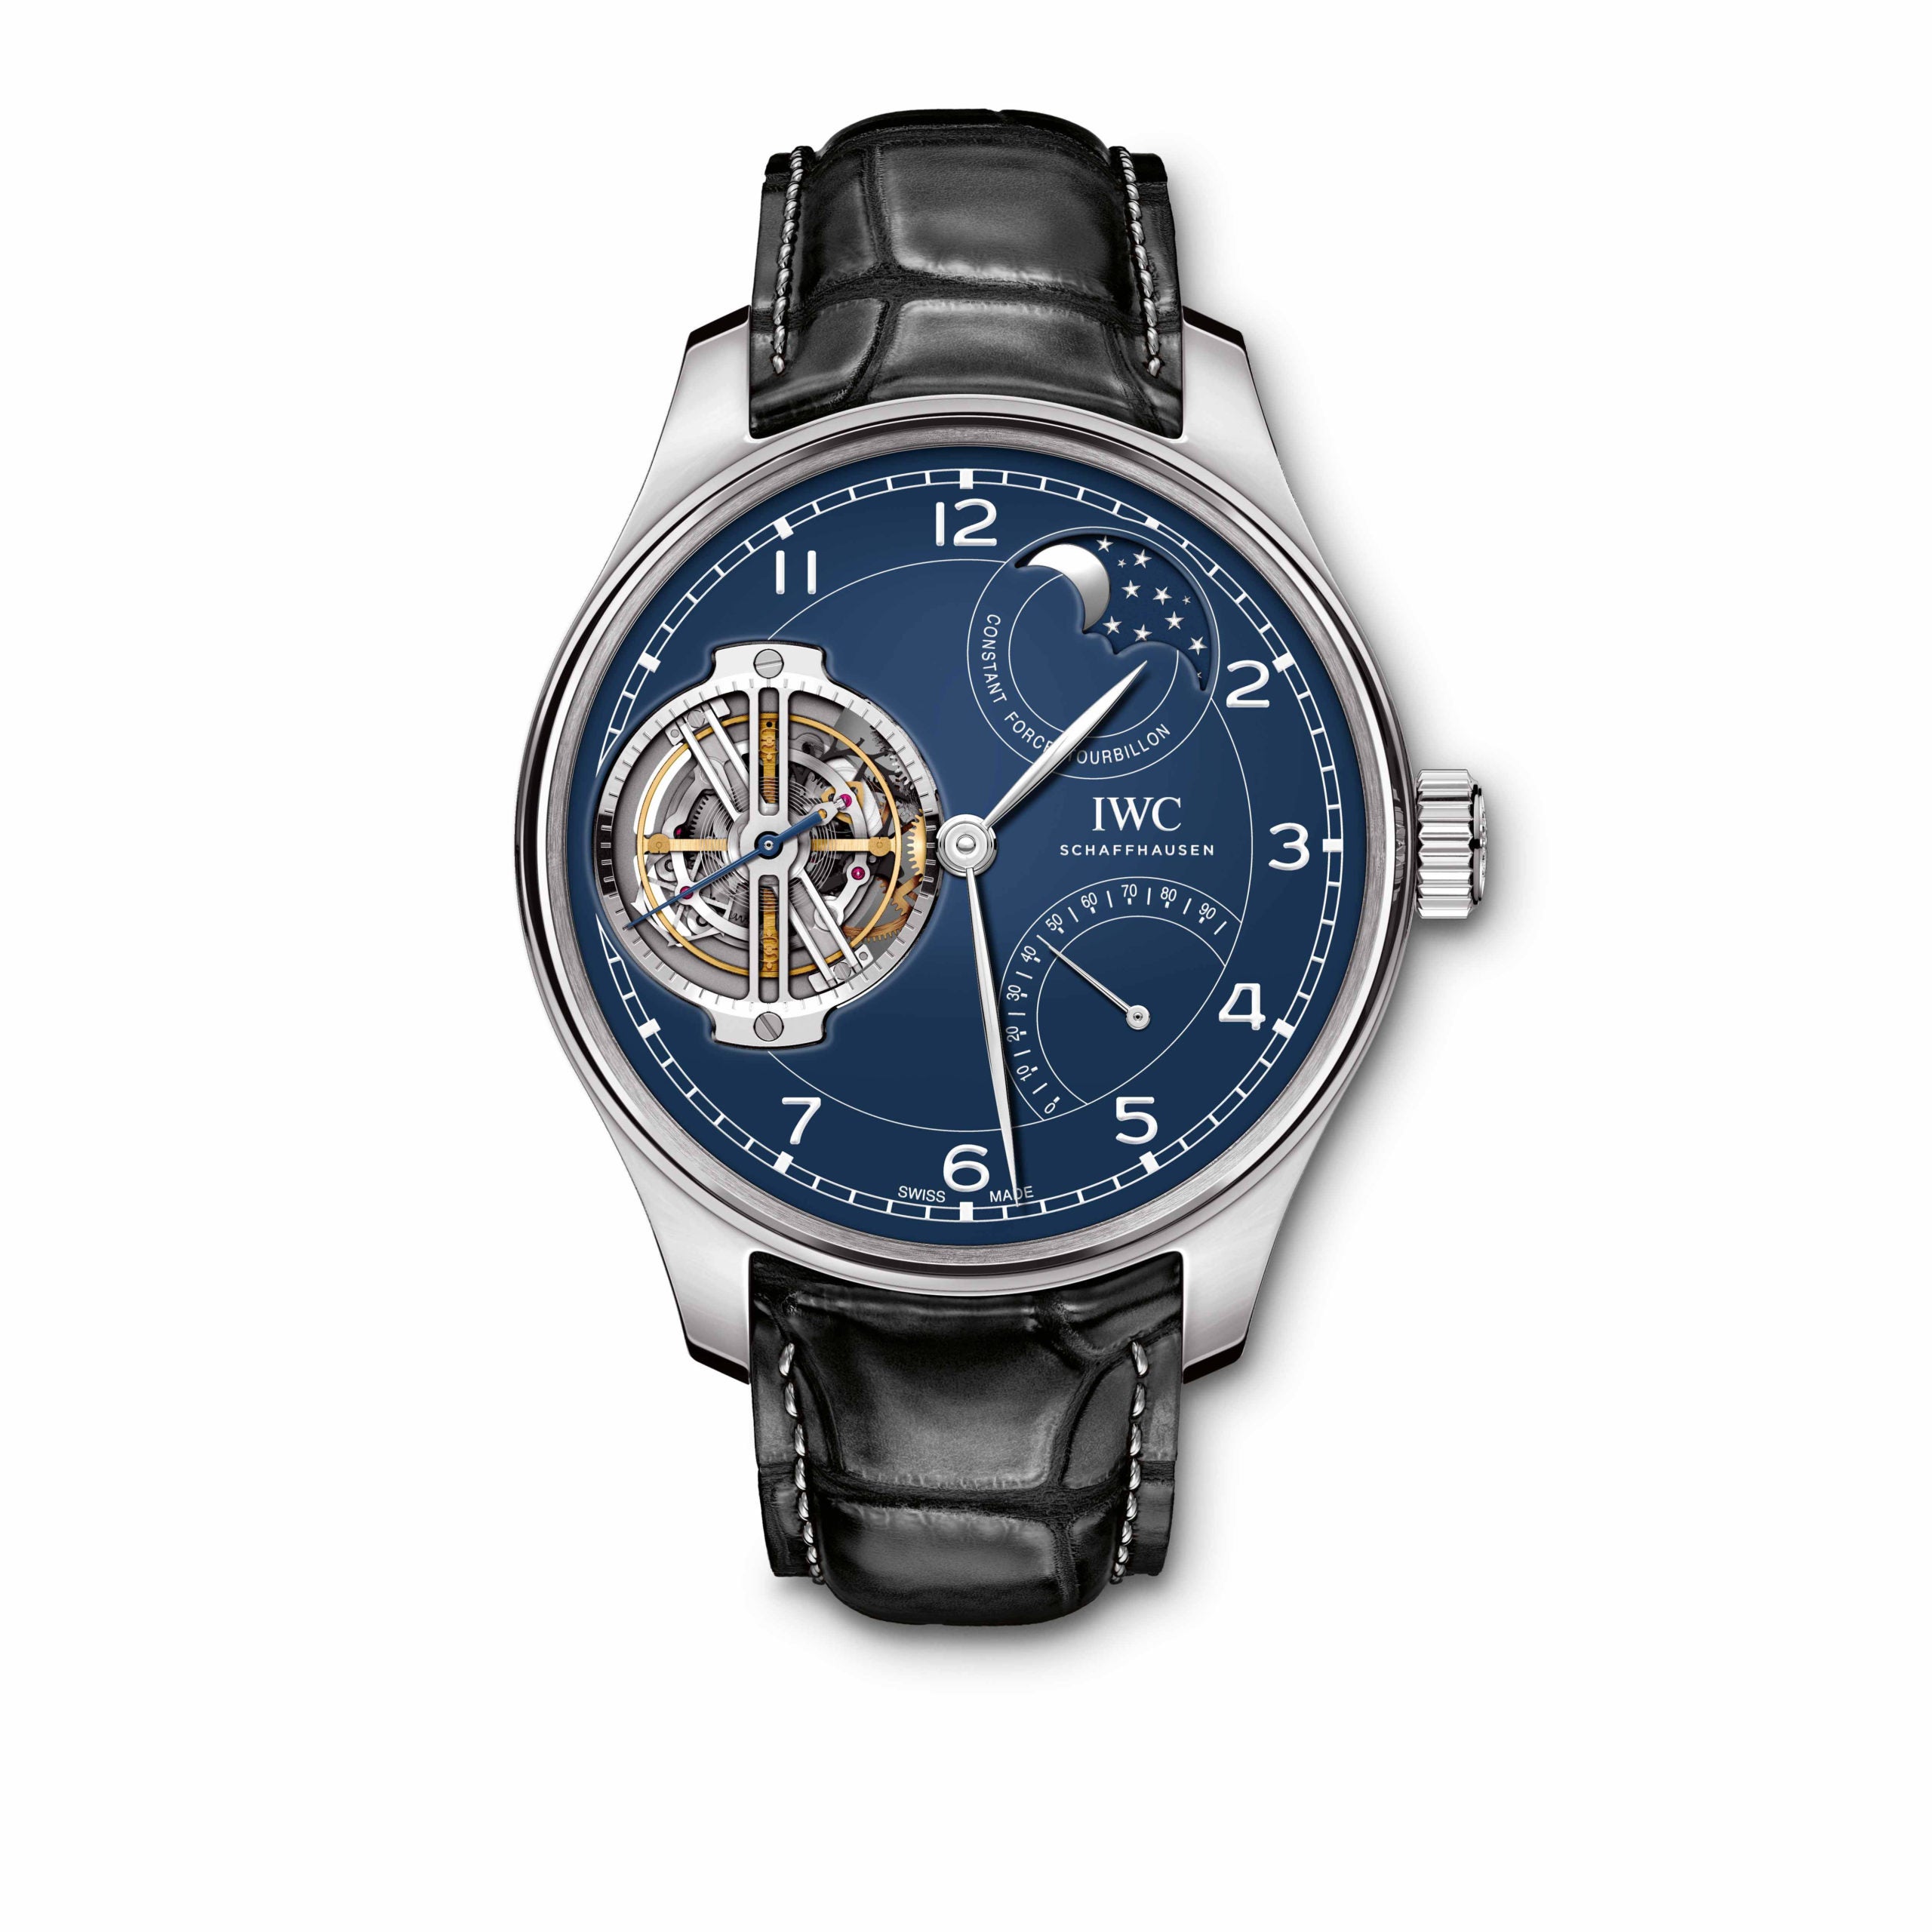 IWC PORTUGIESER CONSTANT-FORCE TOURBILLON EDITION 150 YEARS